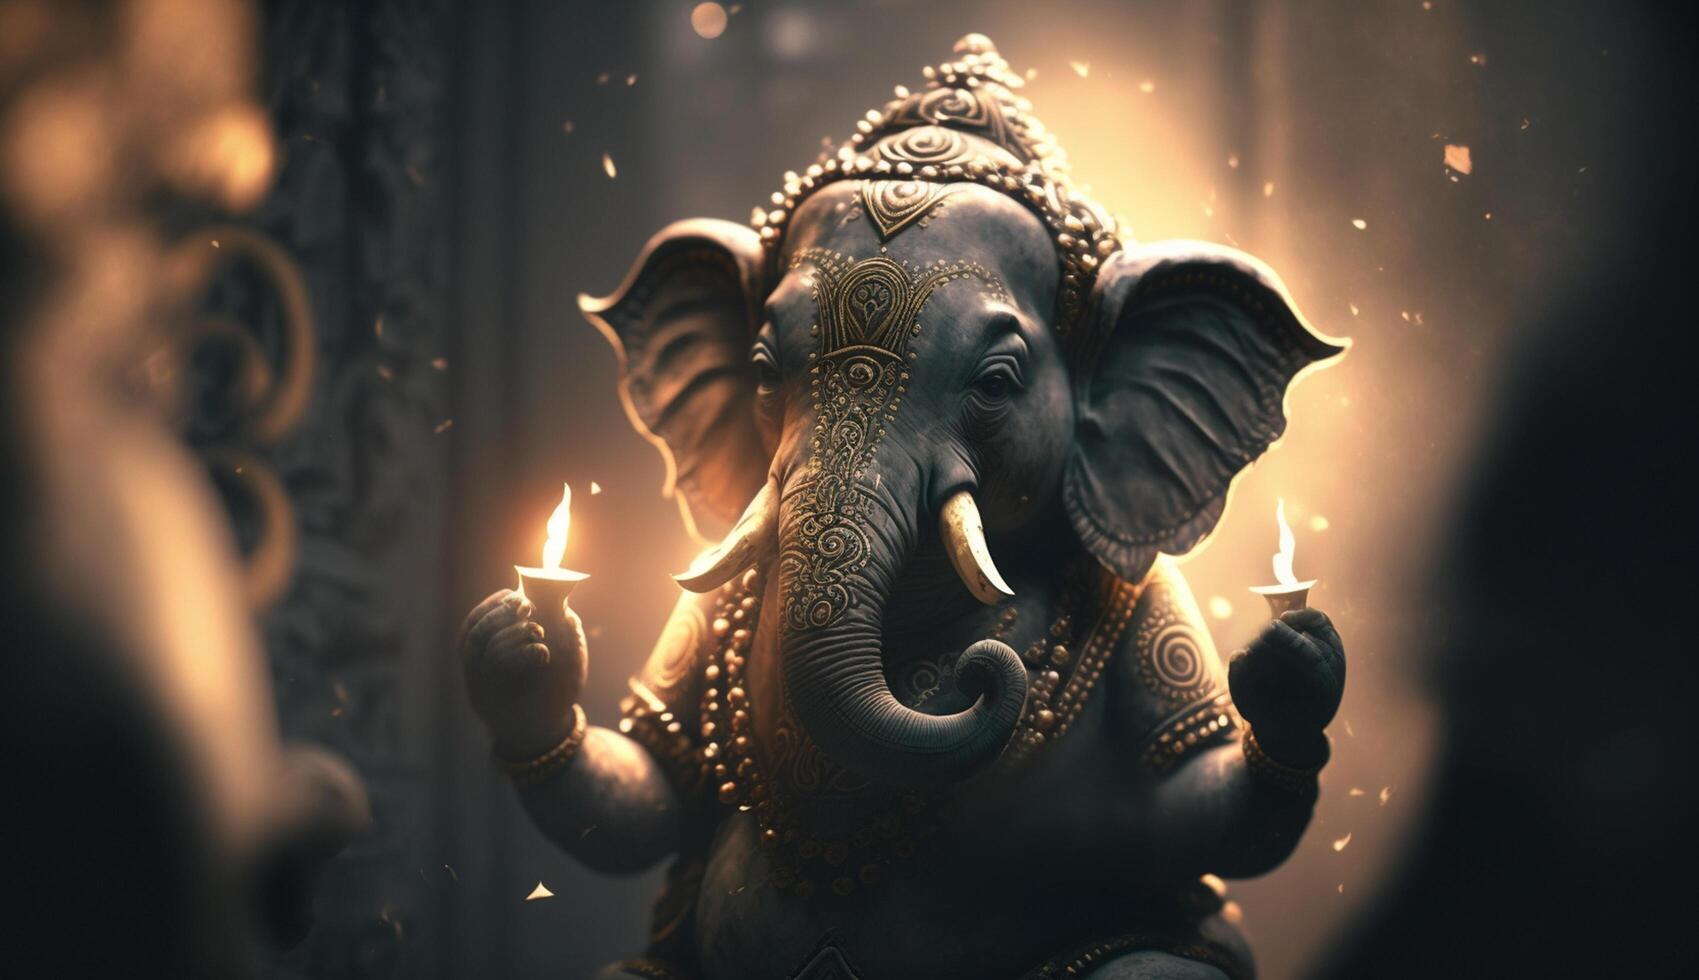 Divine Wisdom embodied in Indian Elephant Sculpture of Ganesha, the deity of intellect and knowledge photo